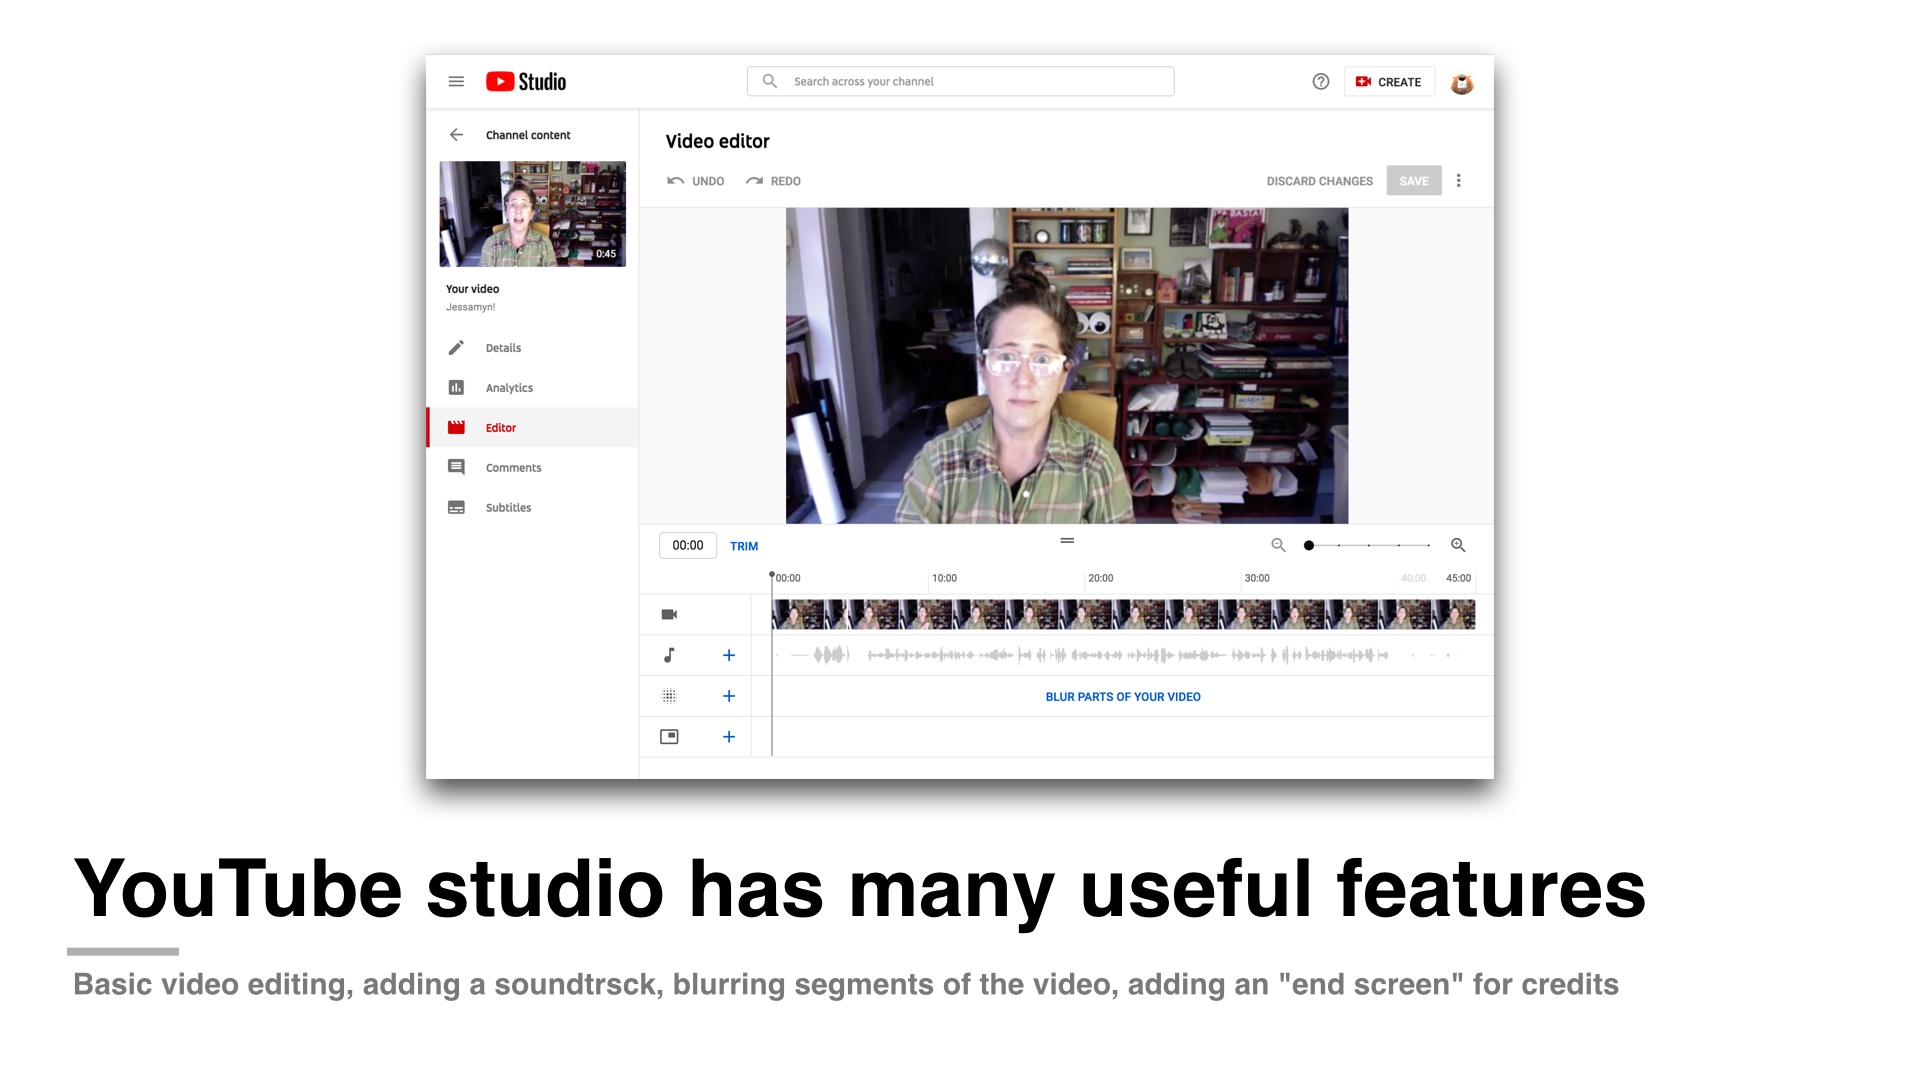 YouTube studio has many useful features:
Basic video editing, adding a soundtrsck, blurring segments of the video, adding an 